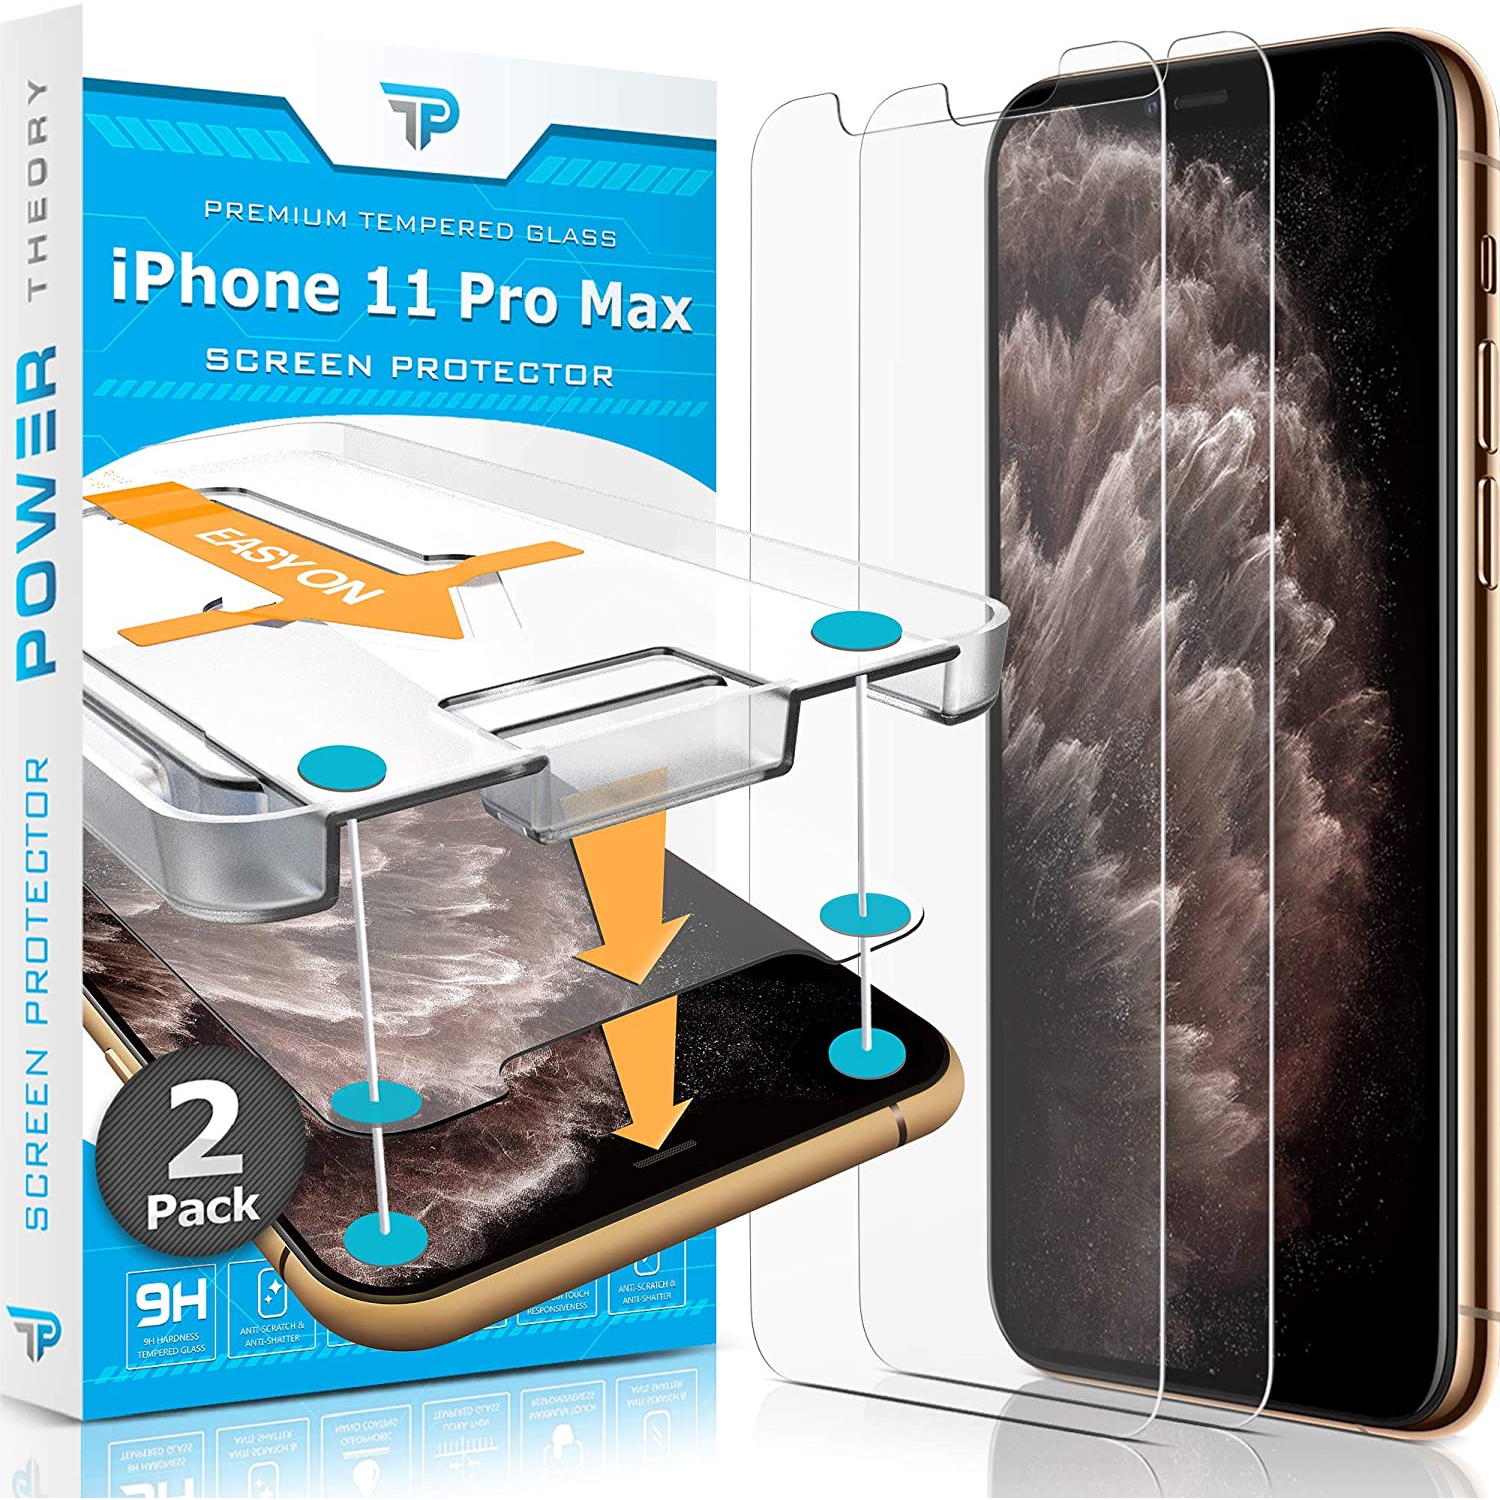 Power Theory iPhone 11 Pro Max Glass Screen Protector [2-Pack] with Easy Install Kit [Premium Tempered Glass]